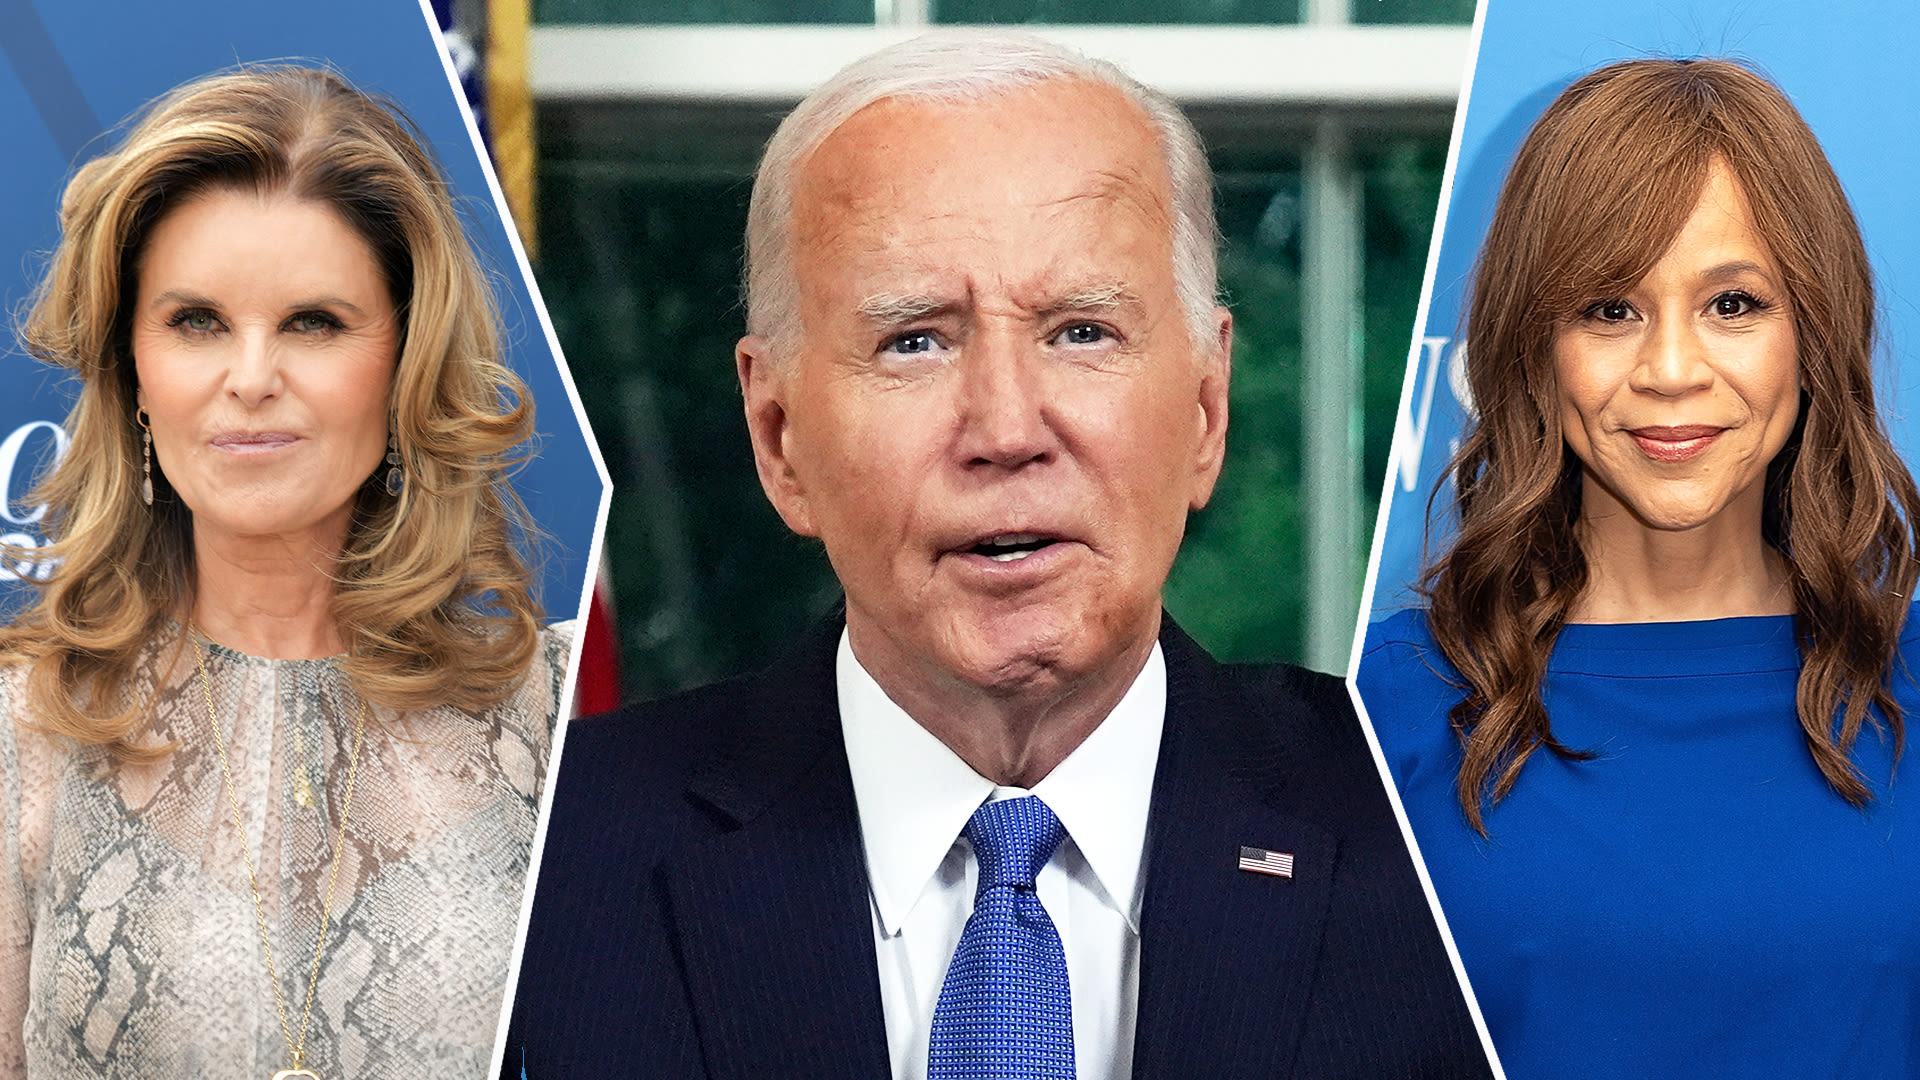 Joe Biden Speaks Out On Suspending Reelection Campaign: Maria Shriver, Rosie Perez & More React | Access